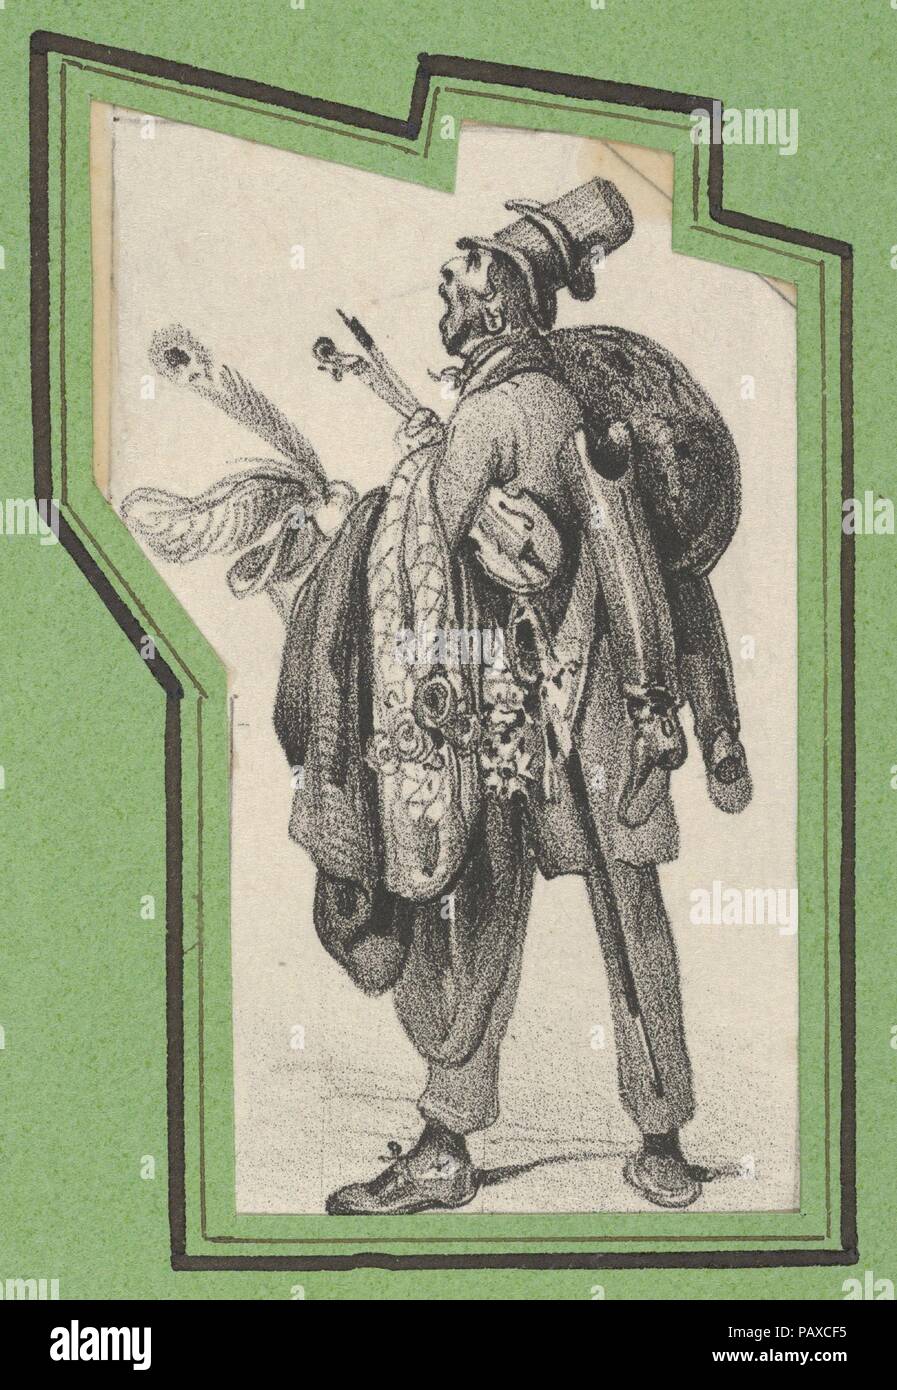 Man wearing two hats and holding boots, jackets and a violin. Artist: Victor Adam (French, 1801-1866). Dimensions: Sheet: 2 5/8 × 1 5/8 in. (6.7 × 4.2 cm)  Mount: 6 3/4 x 3 9/16 in. (17.2 x 9 cm). Date: mid-19th century. Museum: Metropolitan Museum of Art, New York, USA. Stock Photo